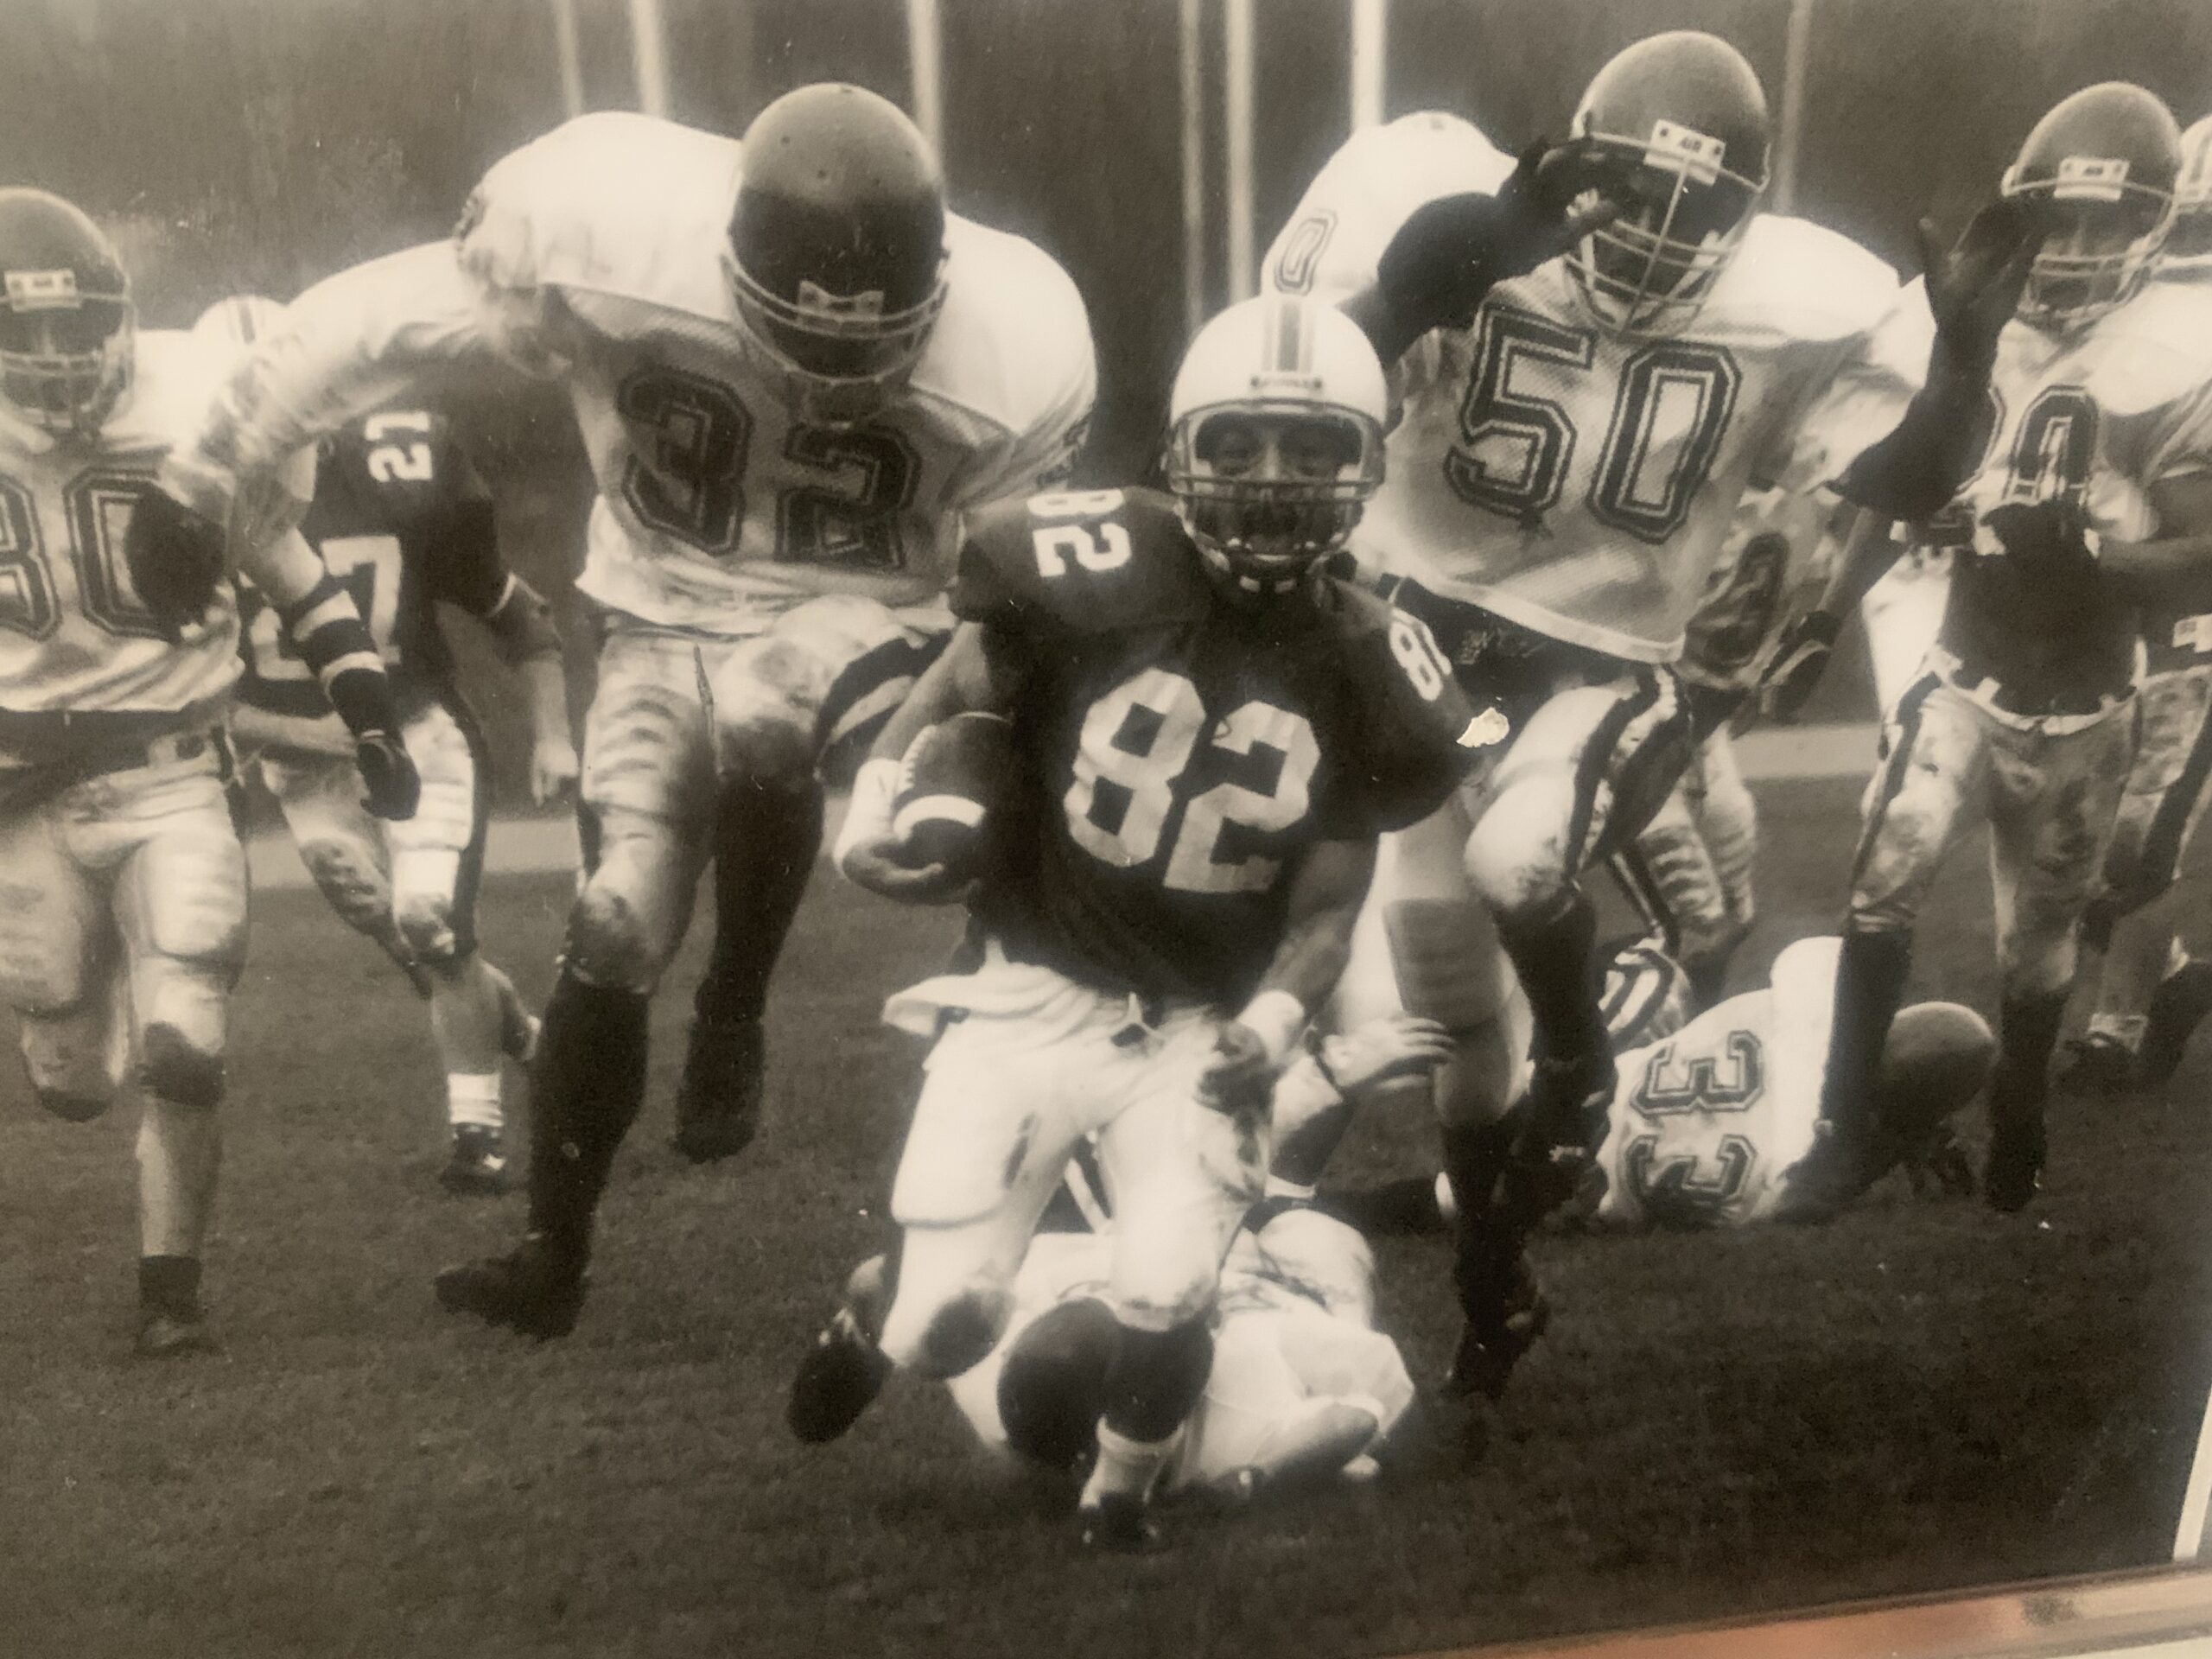 A black and white photo of Jon Choboter running with the ball.